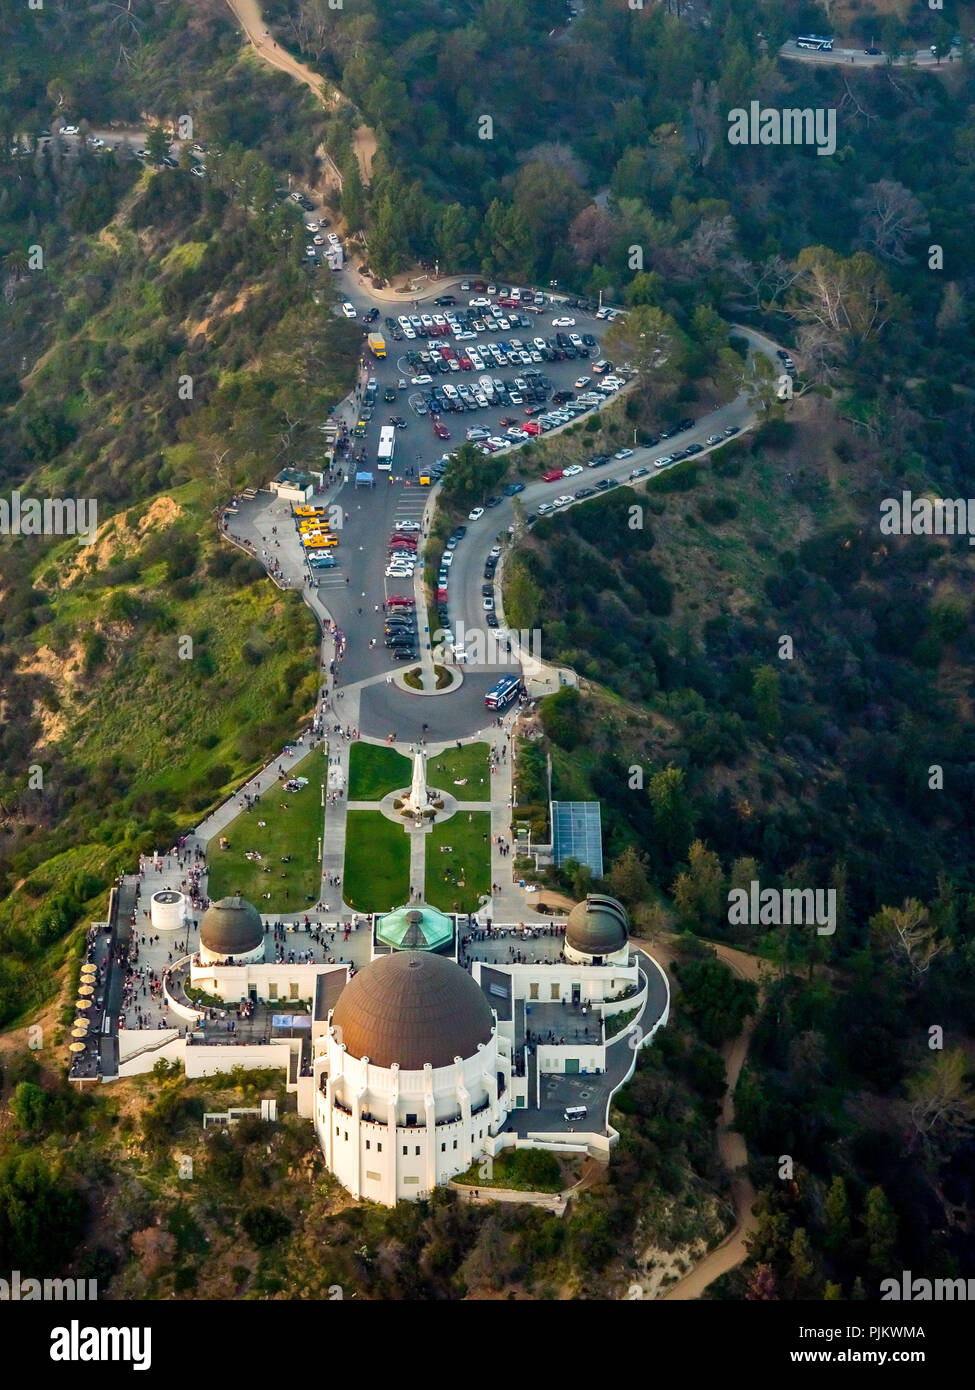 Griffith Observatory, City Observatory, Los Angeles, Los Angeles County, California, USA Stock Photo